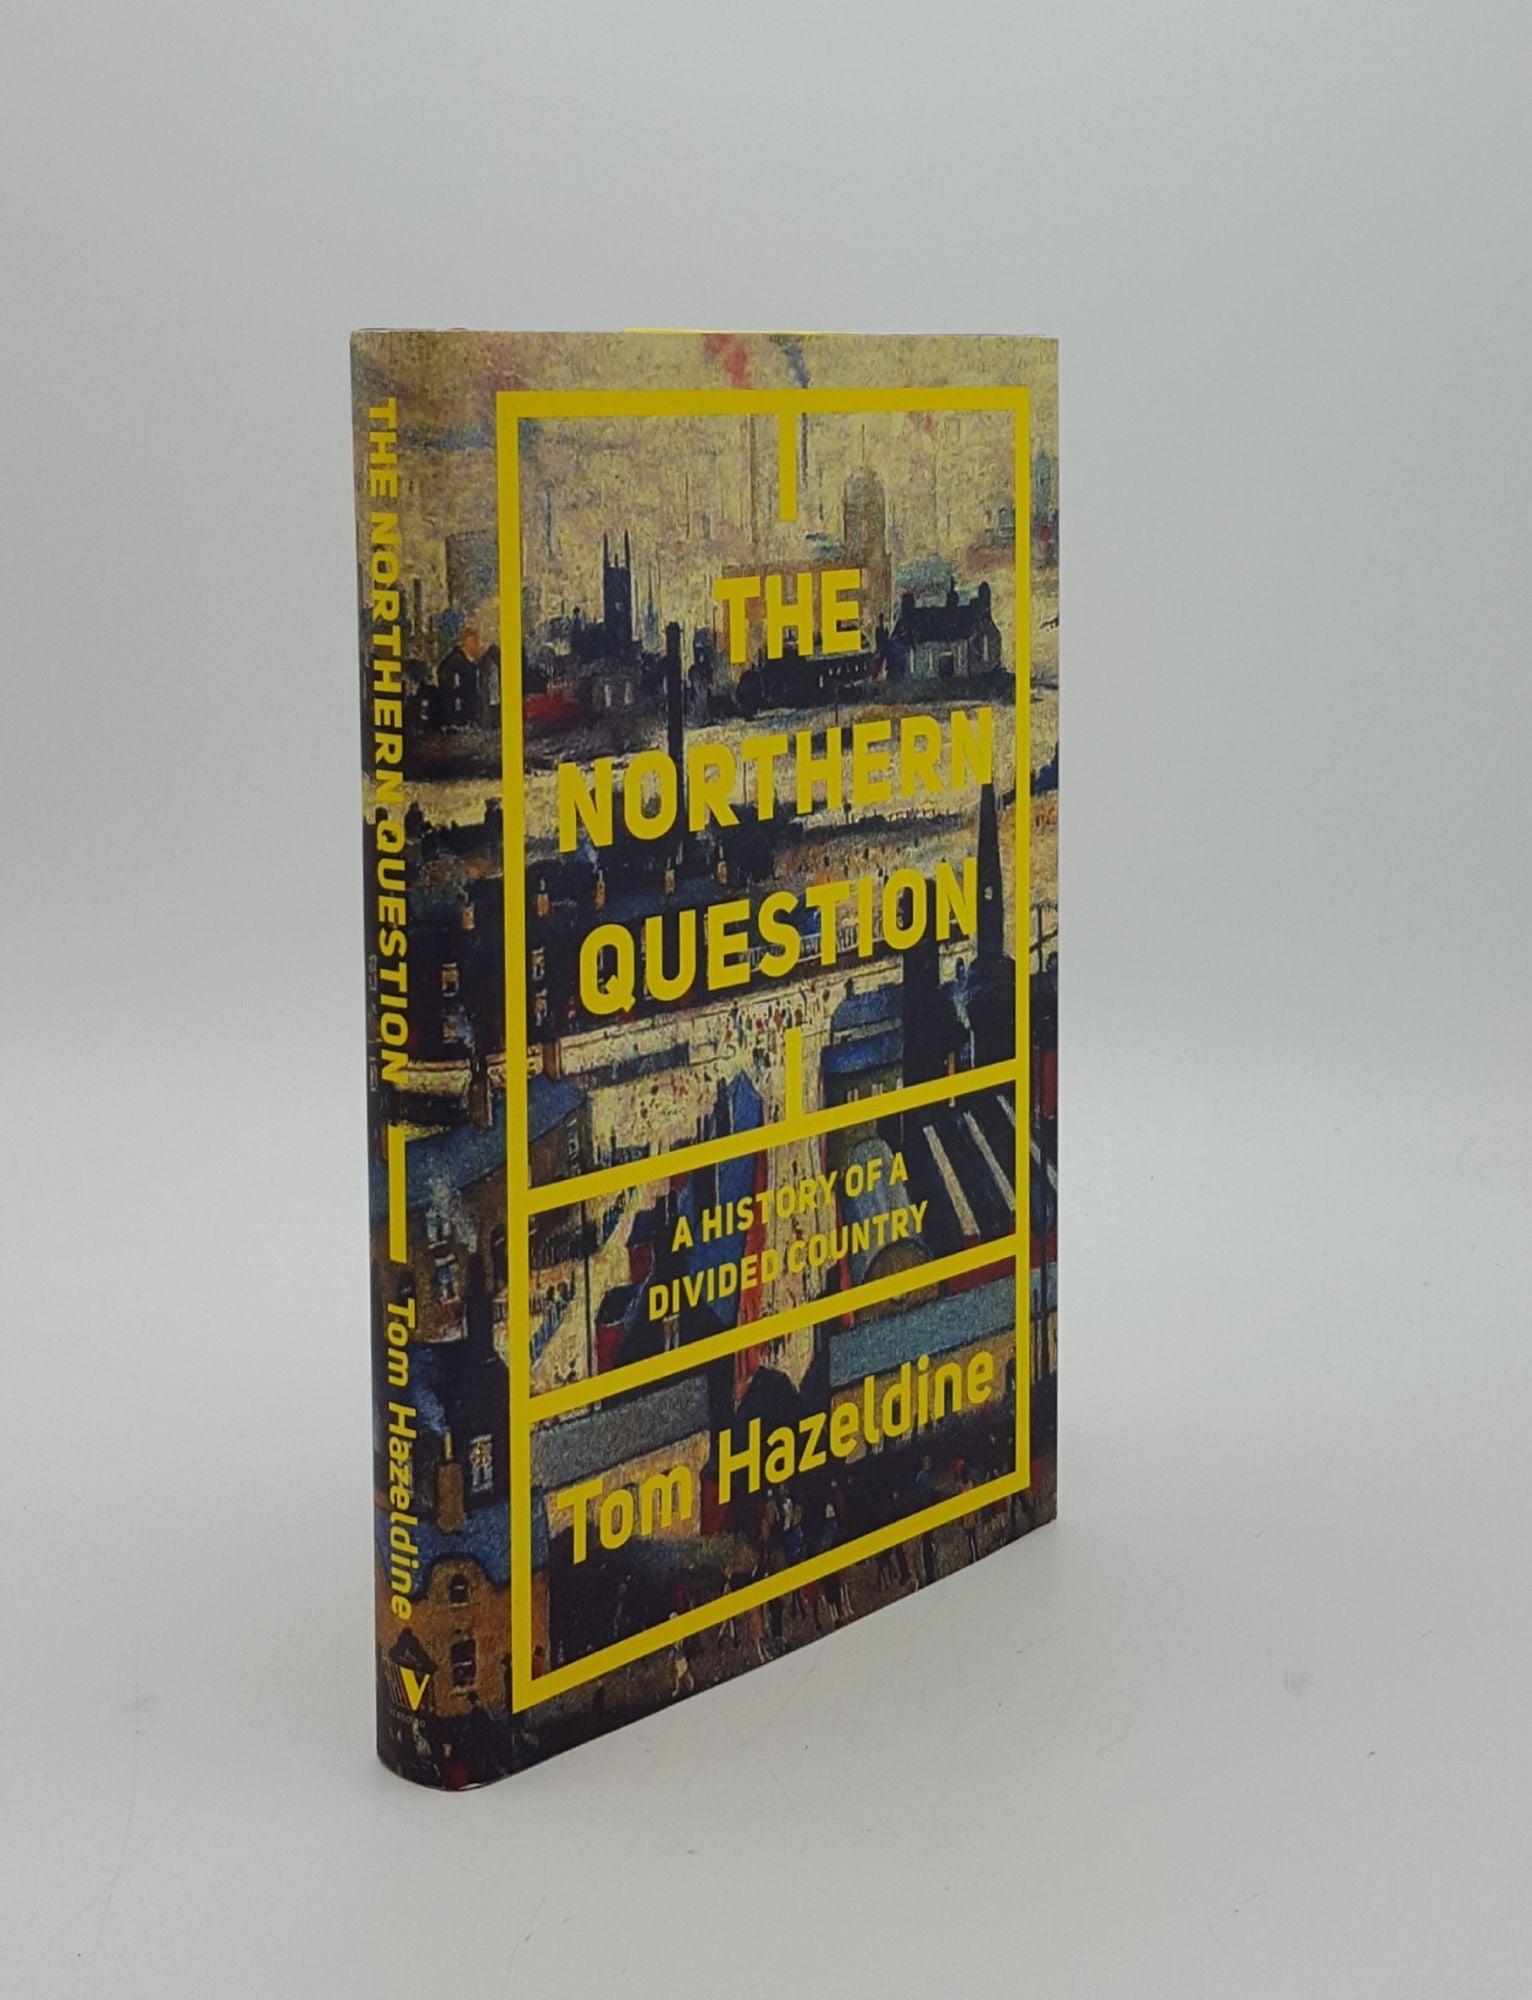 HAZELDINE Tom - The Northern Question a History of a Divided Country